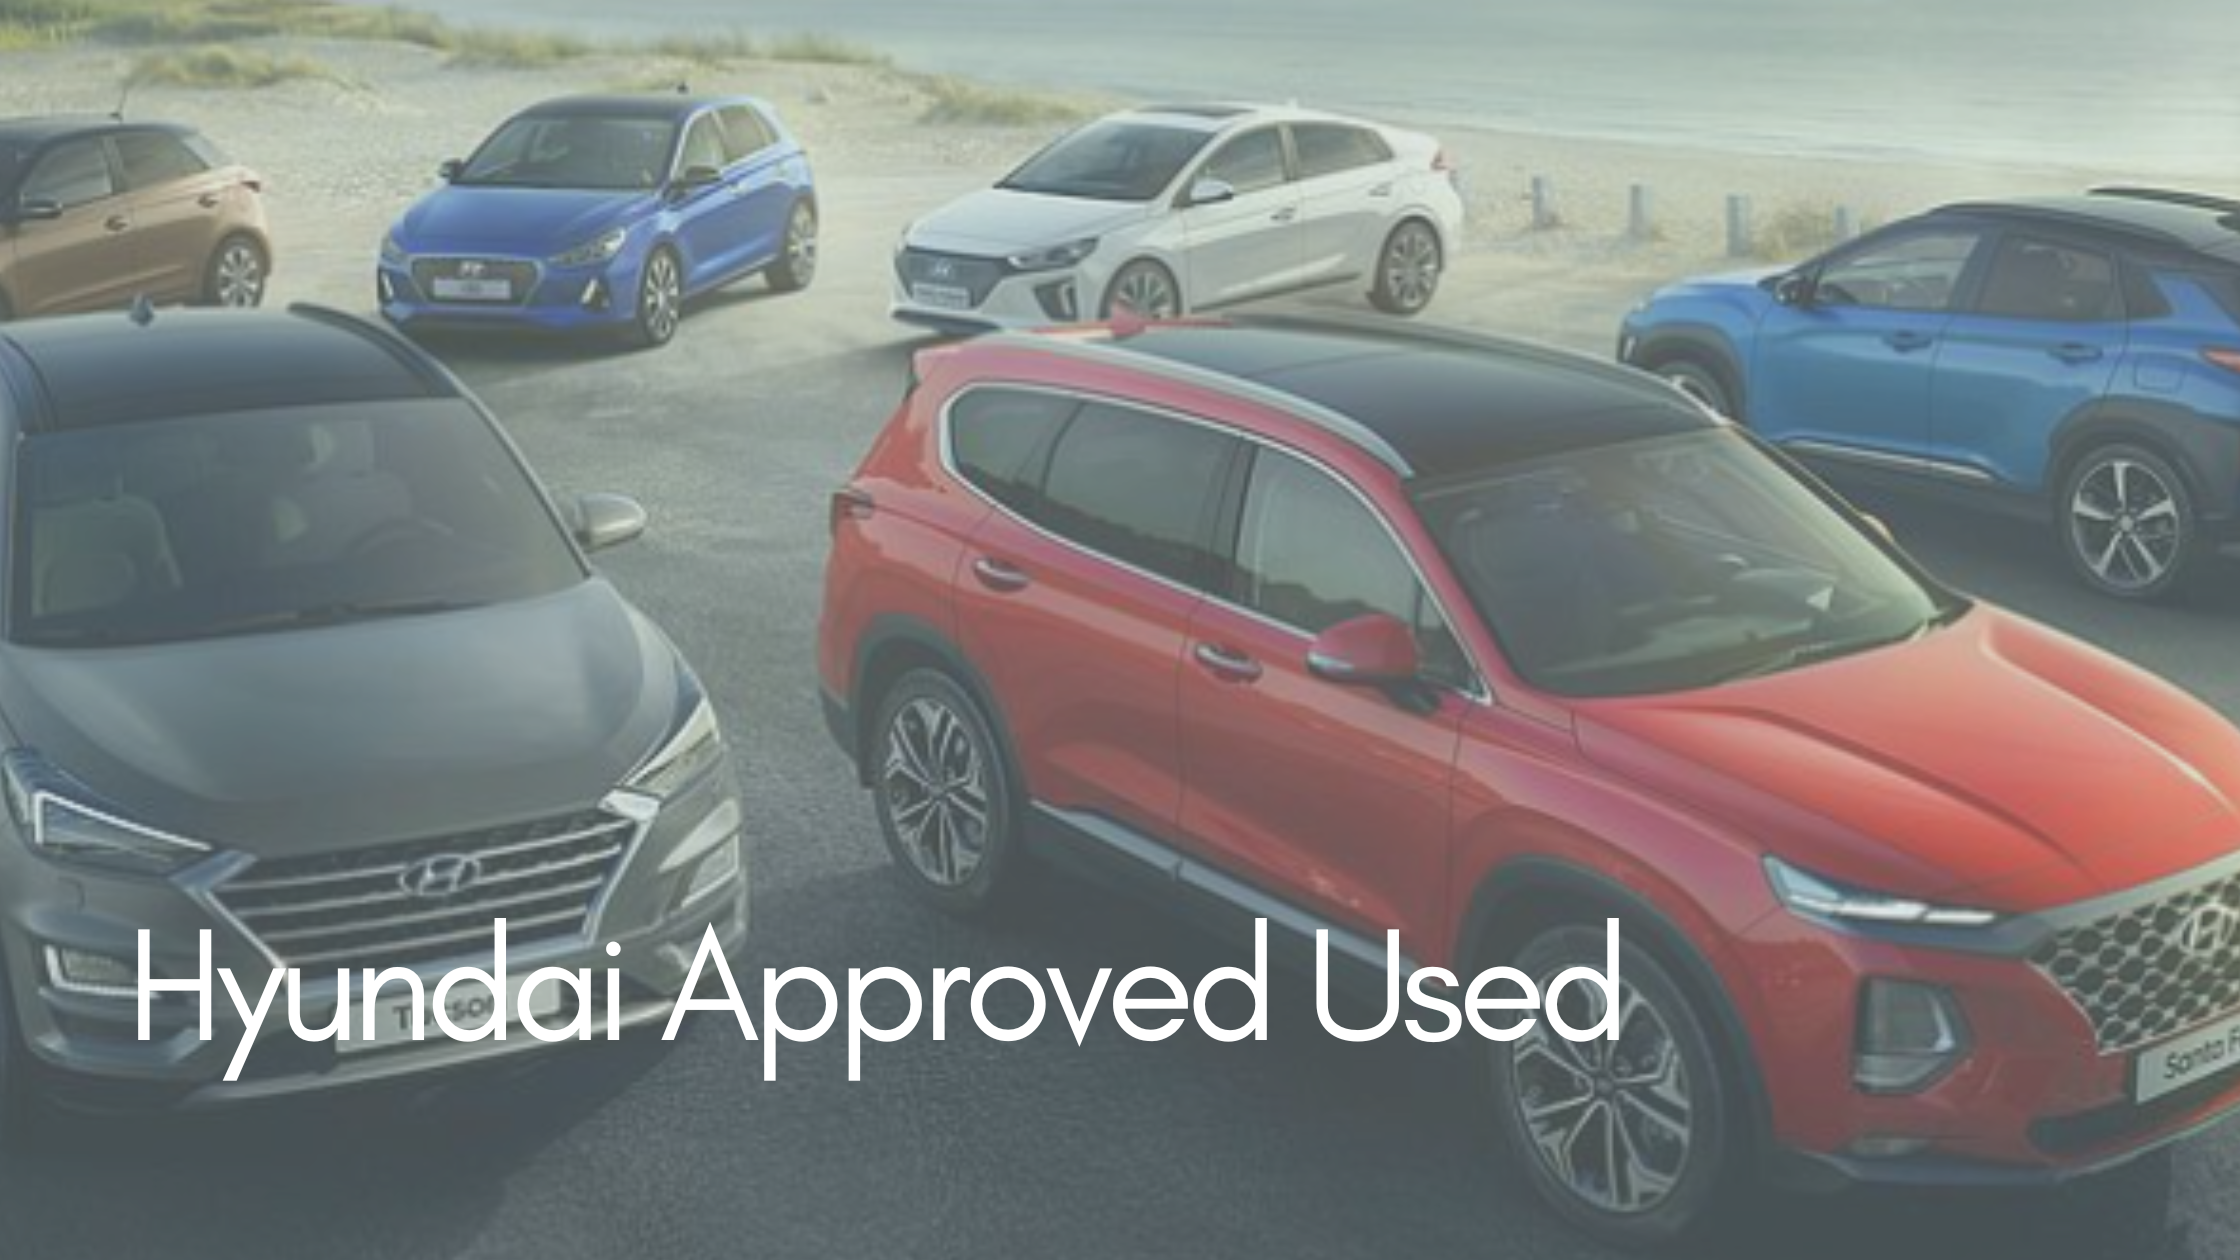 About Hyundai Approved Used